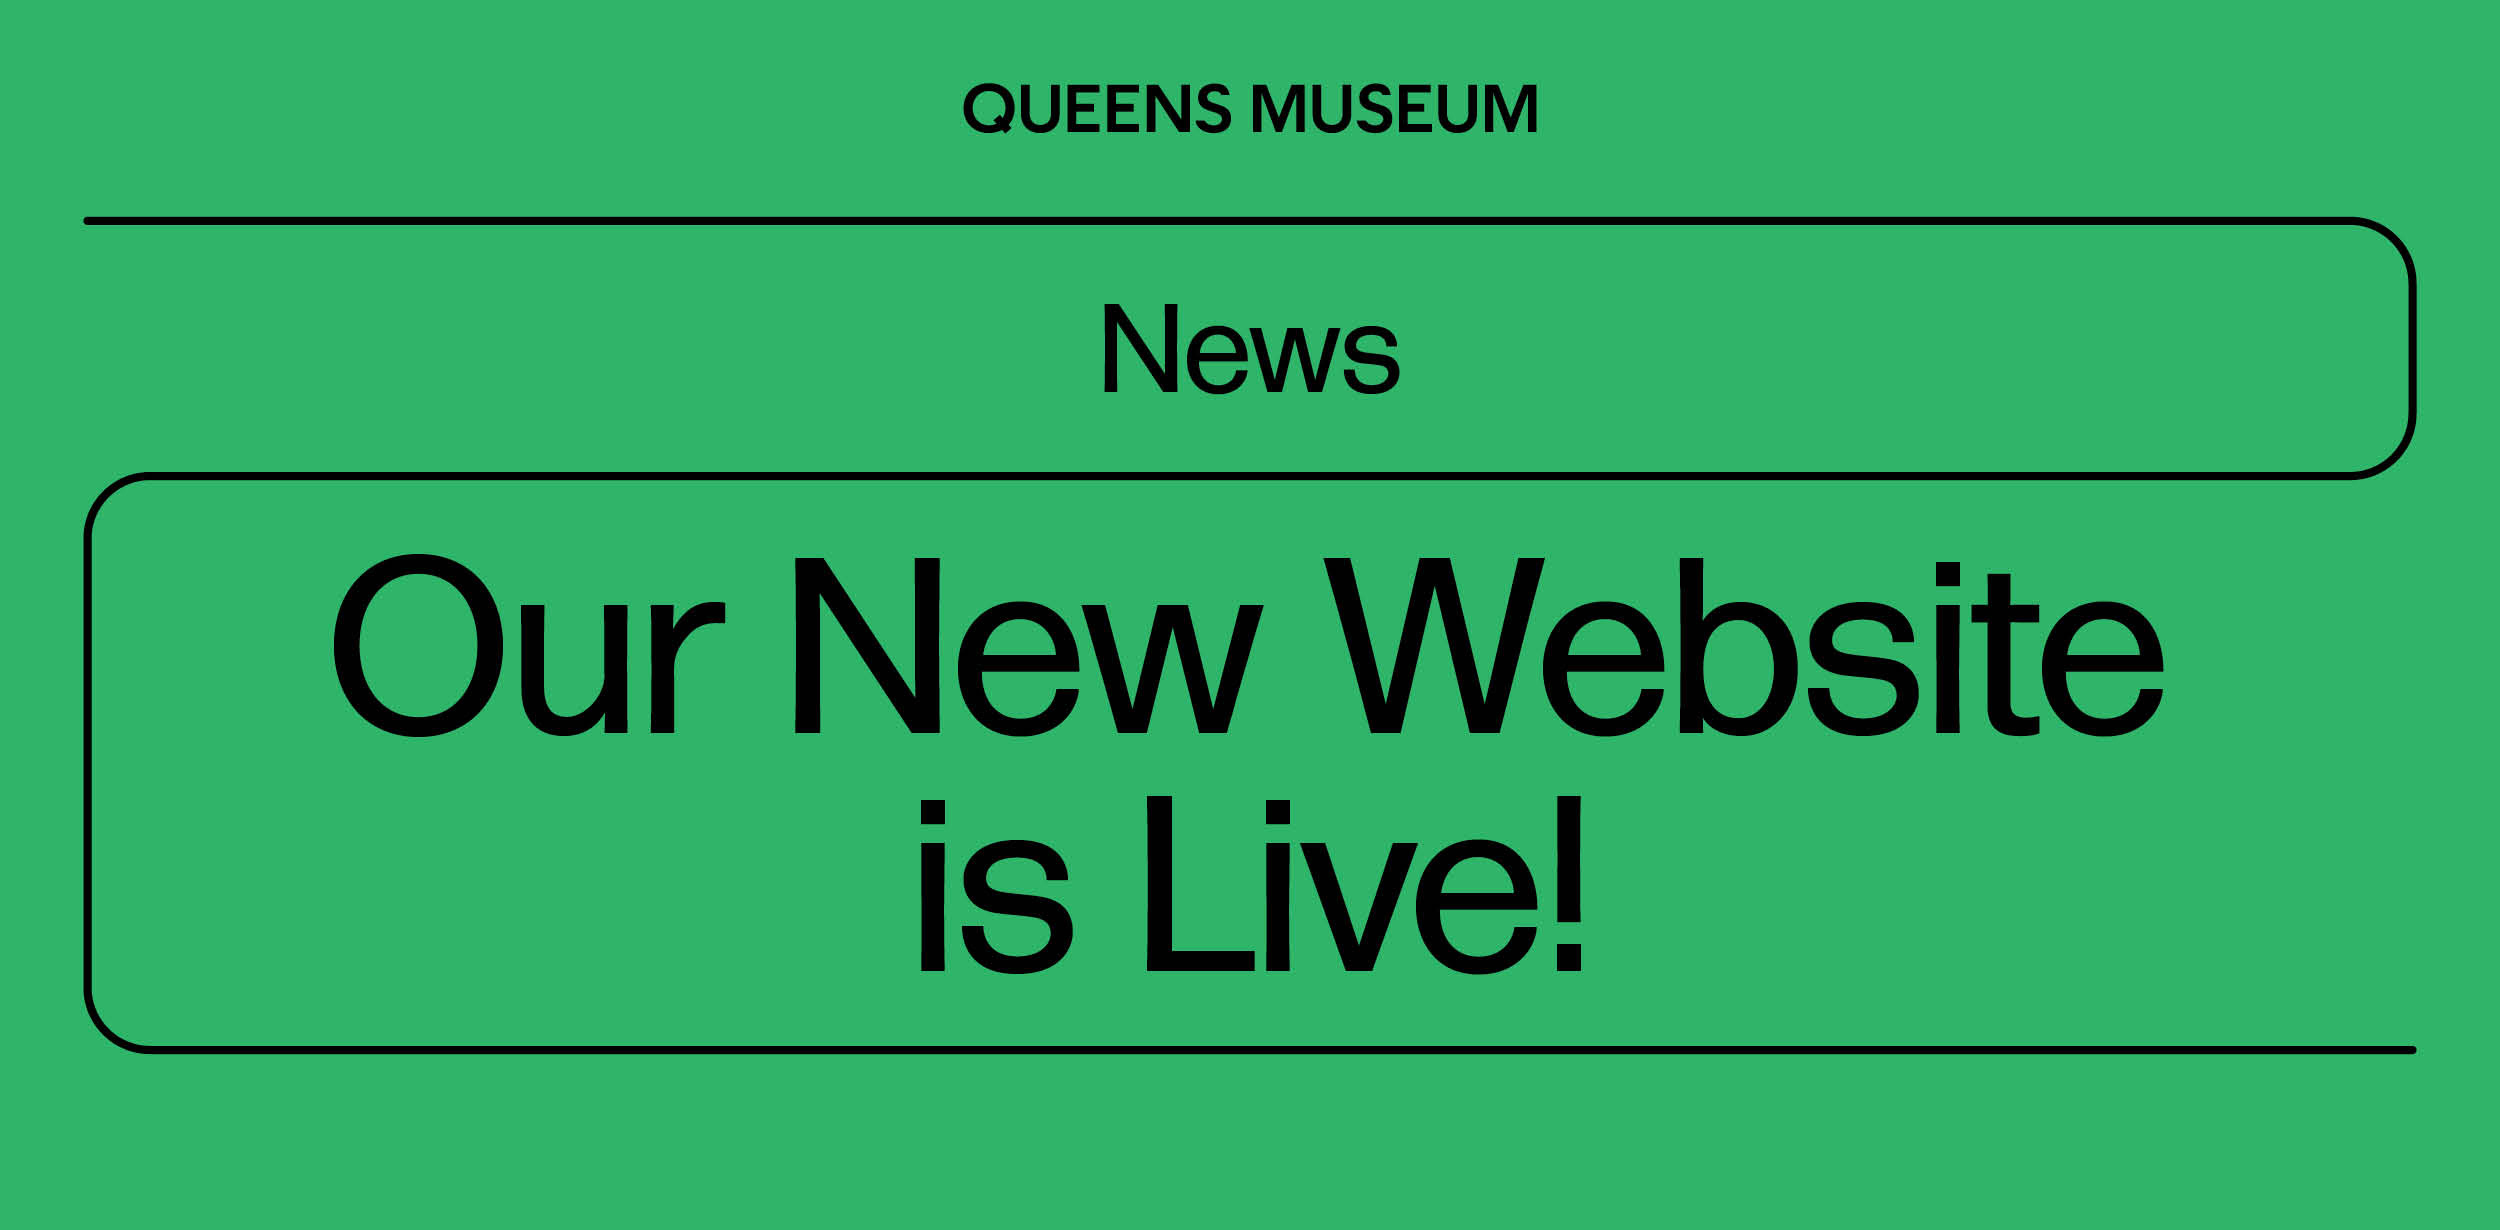 Black text on green background that reads News, Our New Website is Live!